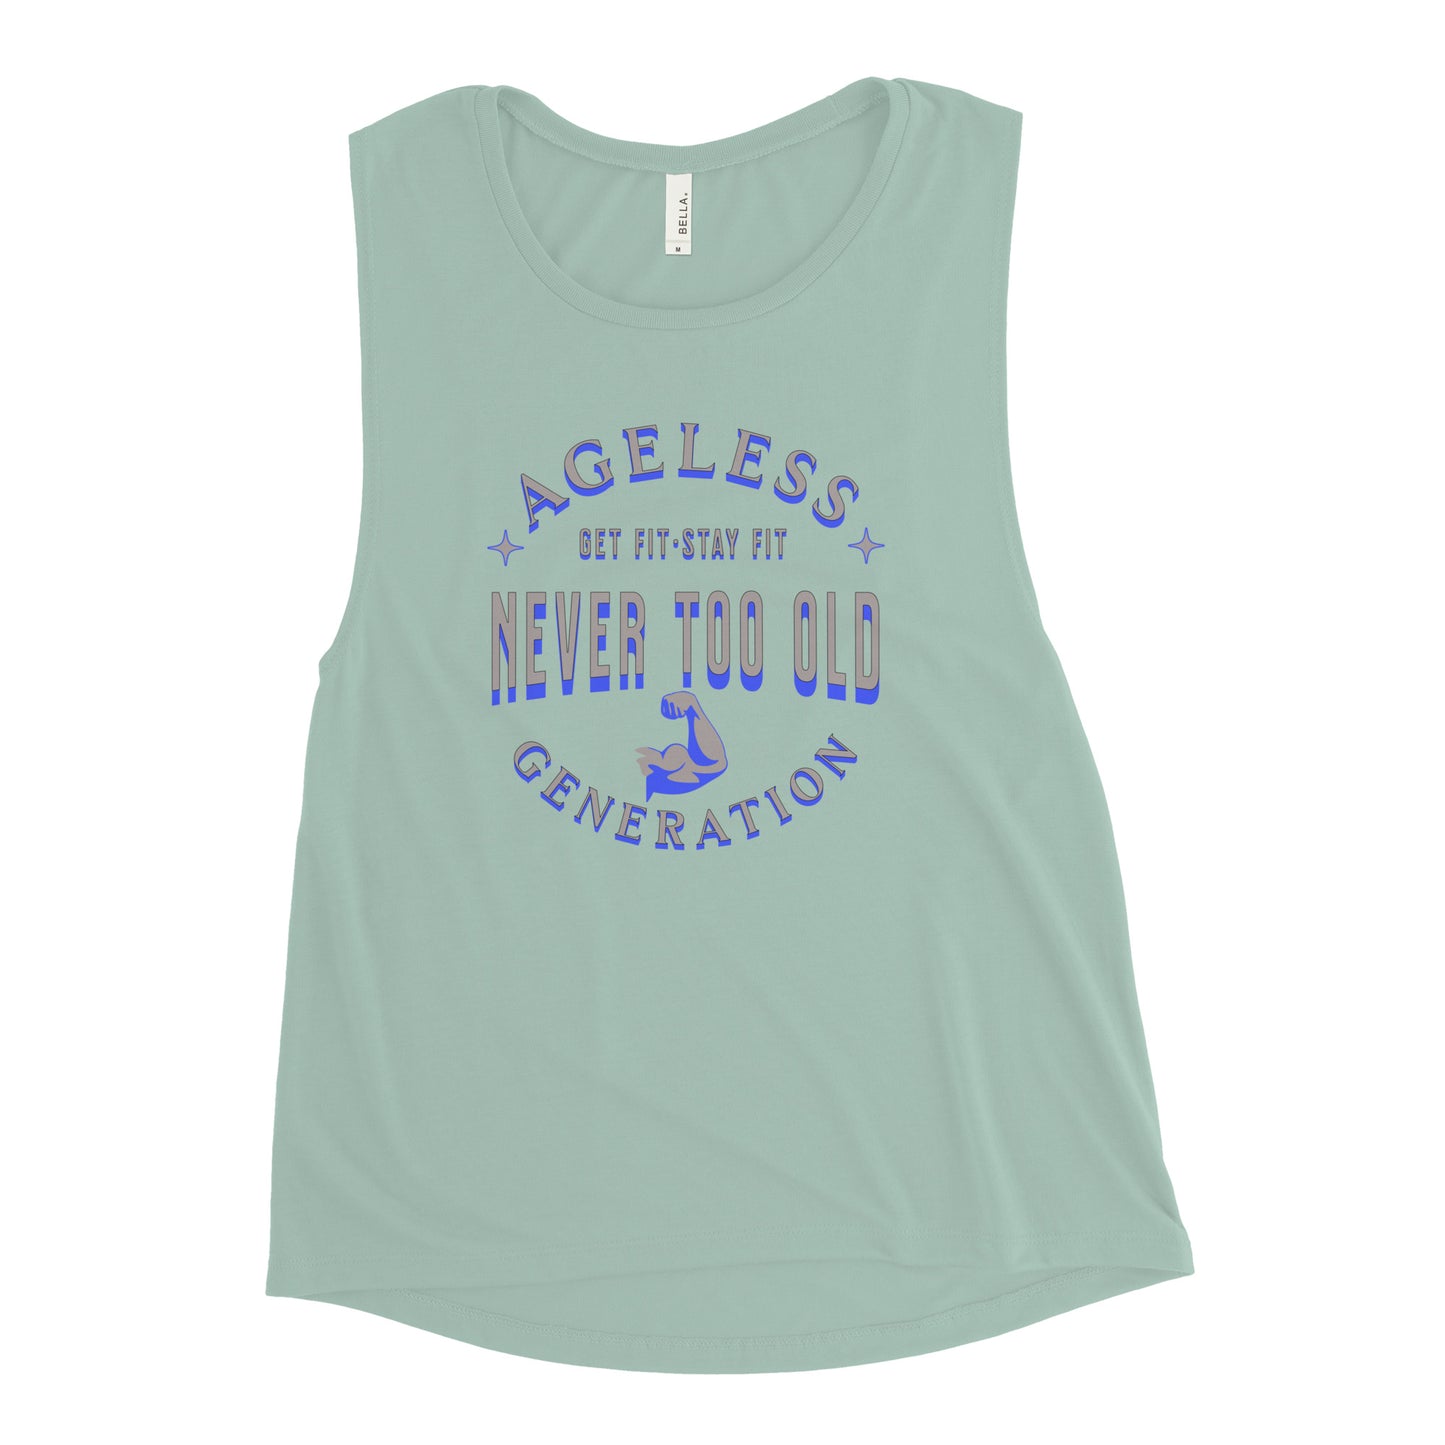 Ageless Generation: Never Too Old Ladies’ Muscle Tank